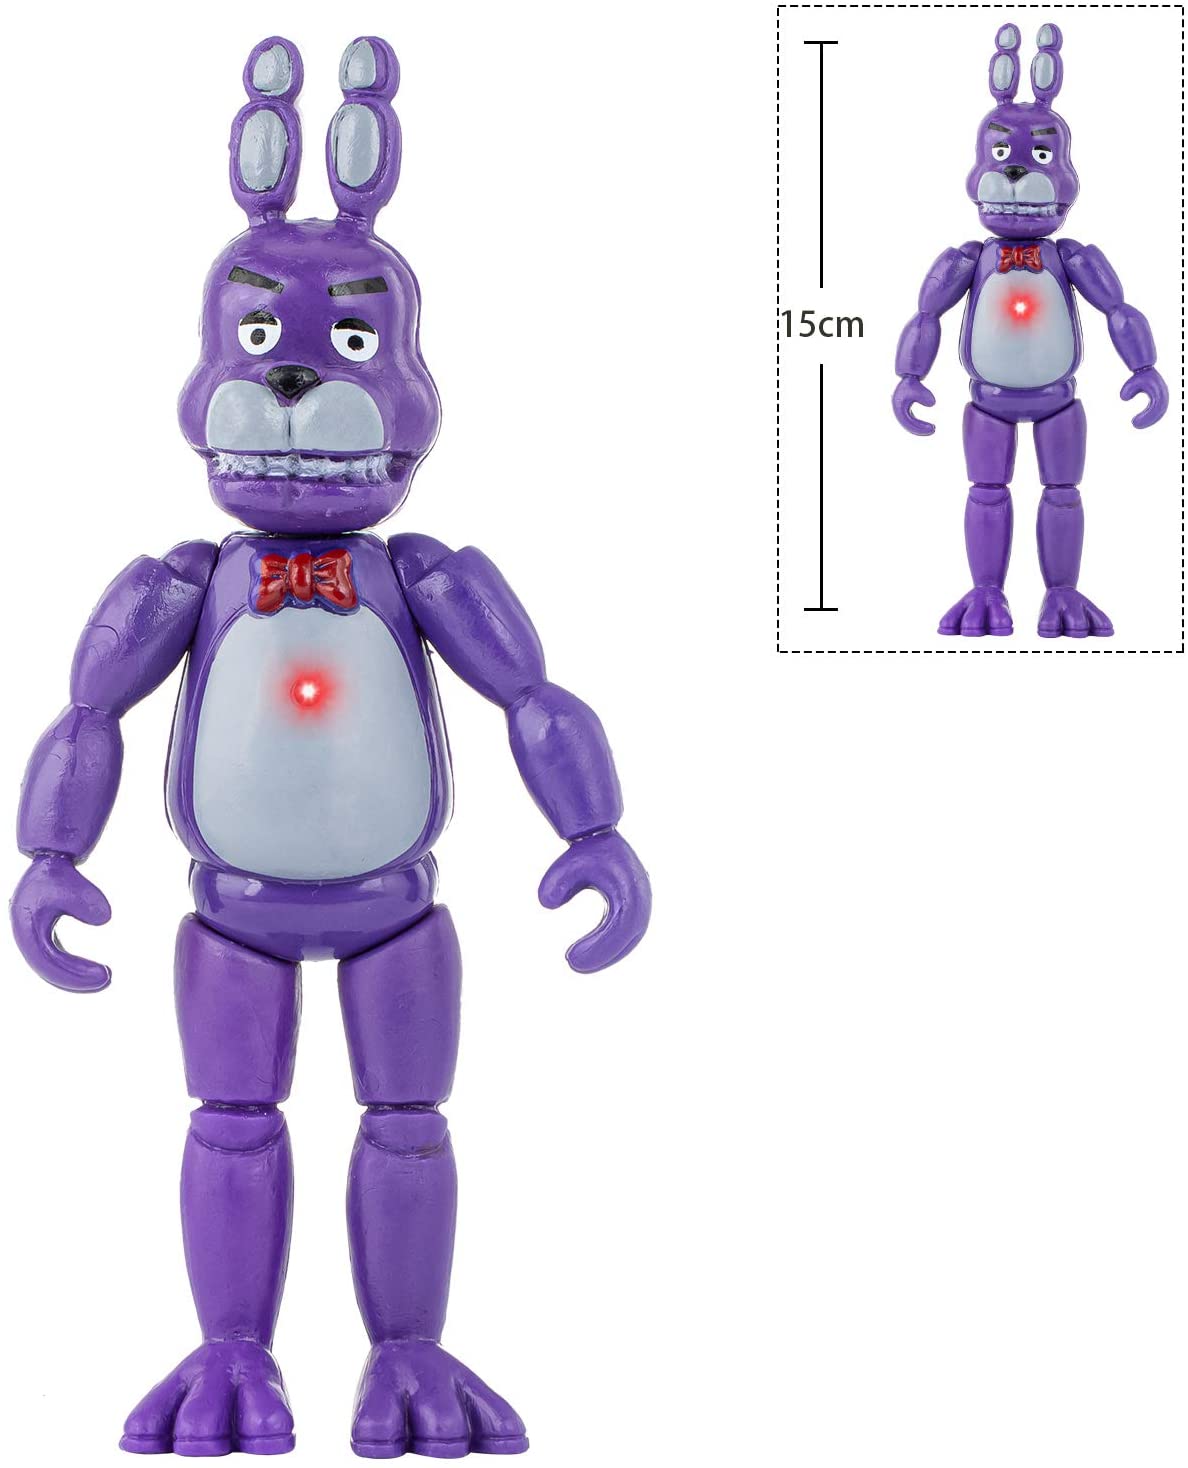 Figures of Five Nights at Freddys